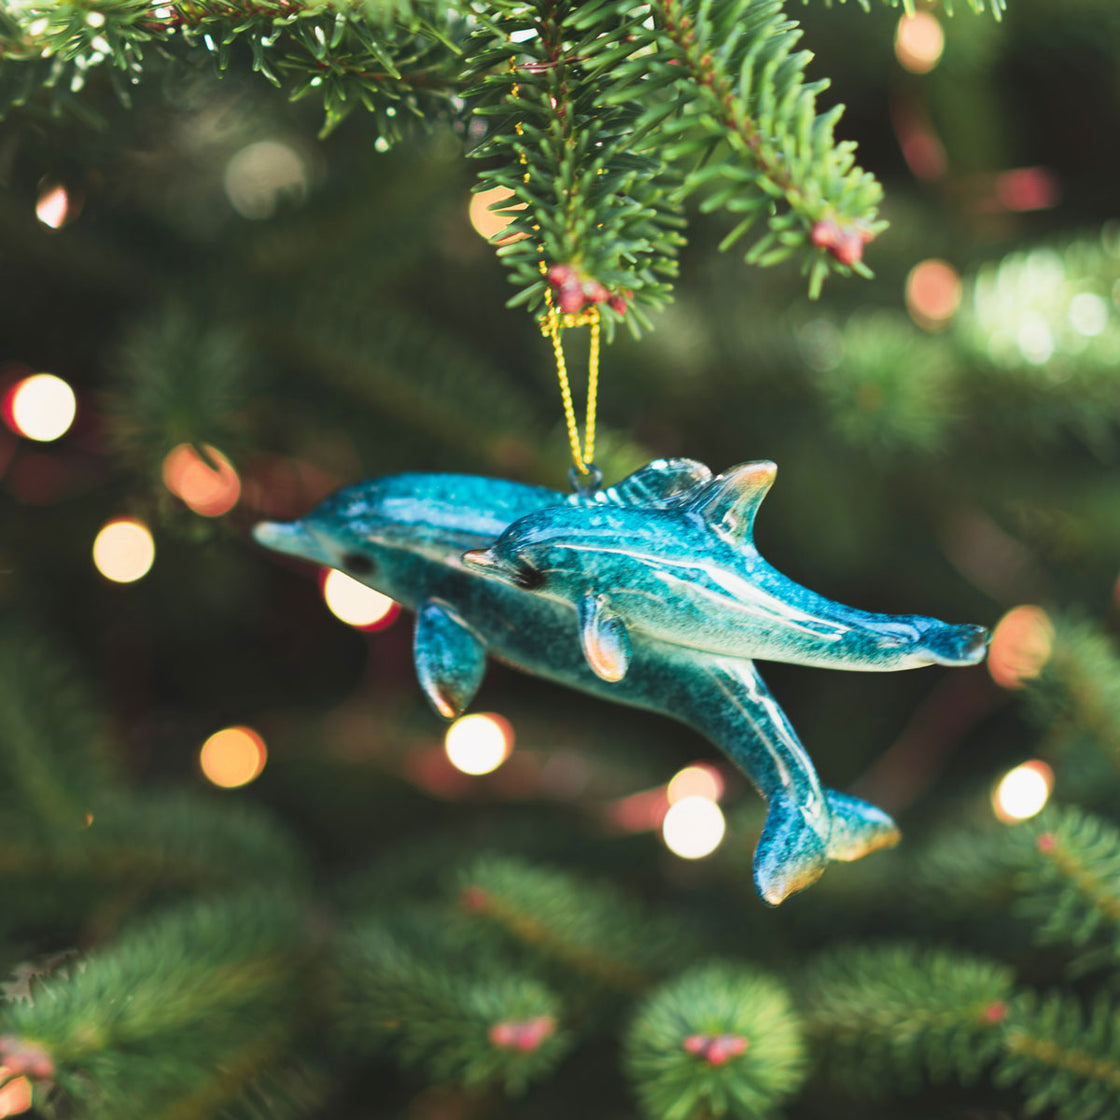 ceramic blue dolphins Christmas tree ornament hanging elegantly on a green Christmas tree with white lights in the background